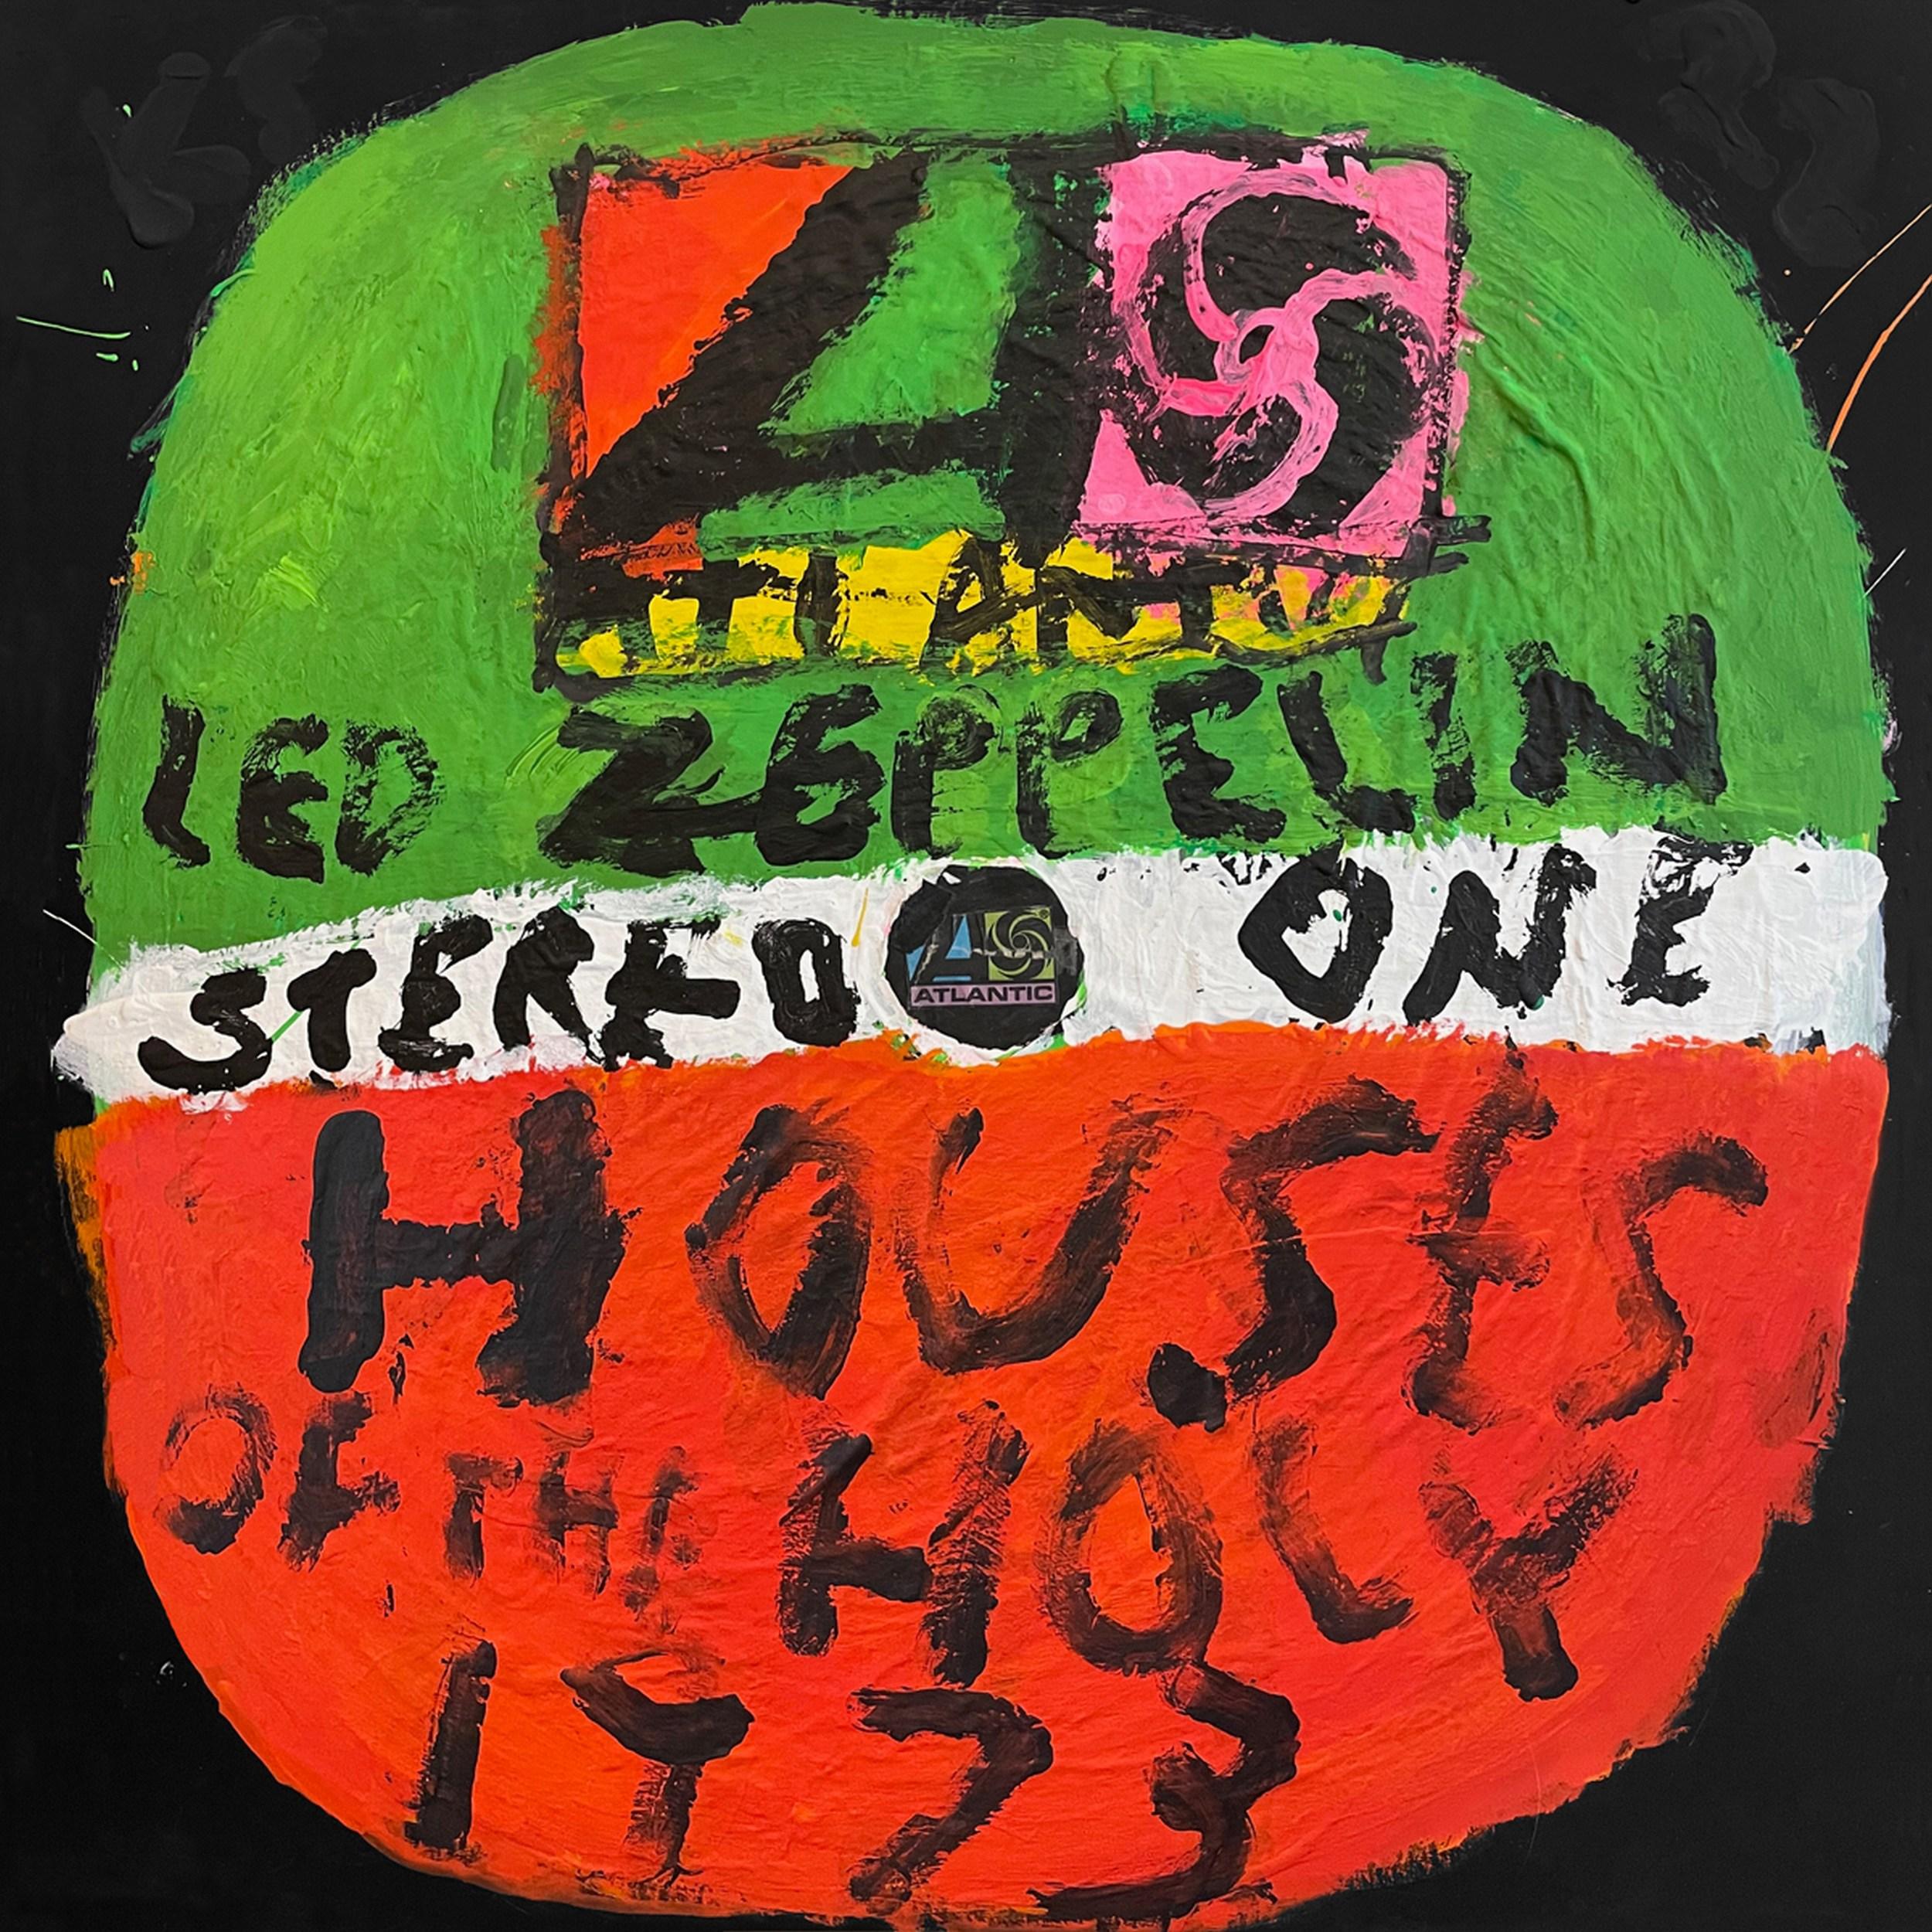 Kerry Smith Figurative Painting - Led Zeppelin - Houses Of The Holy (Grammy, Album Art, Iconic, Rock and Roll)